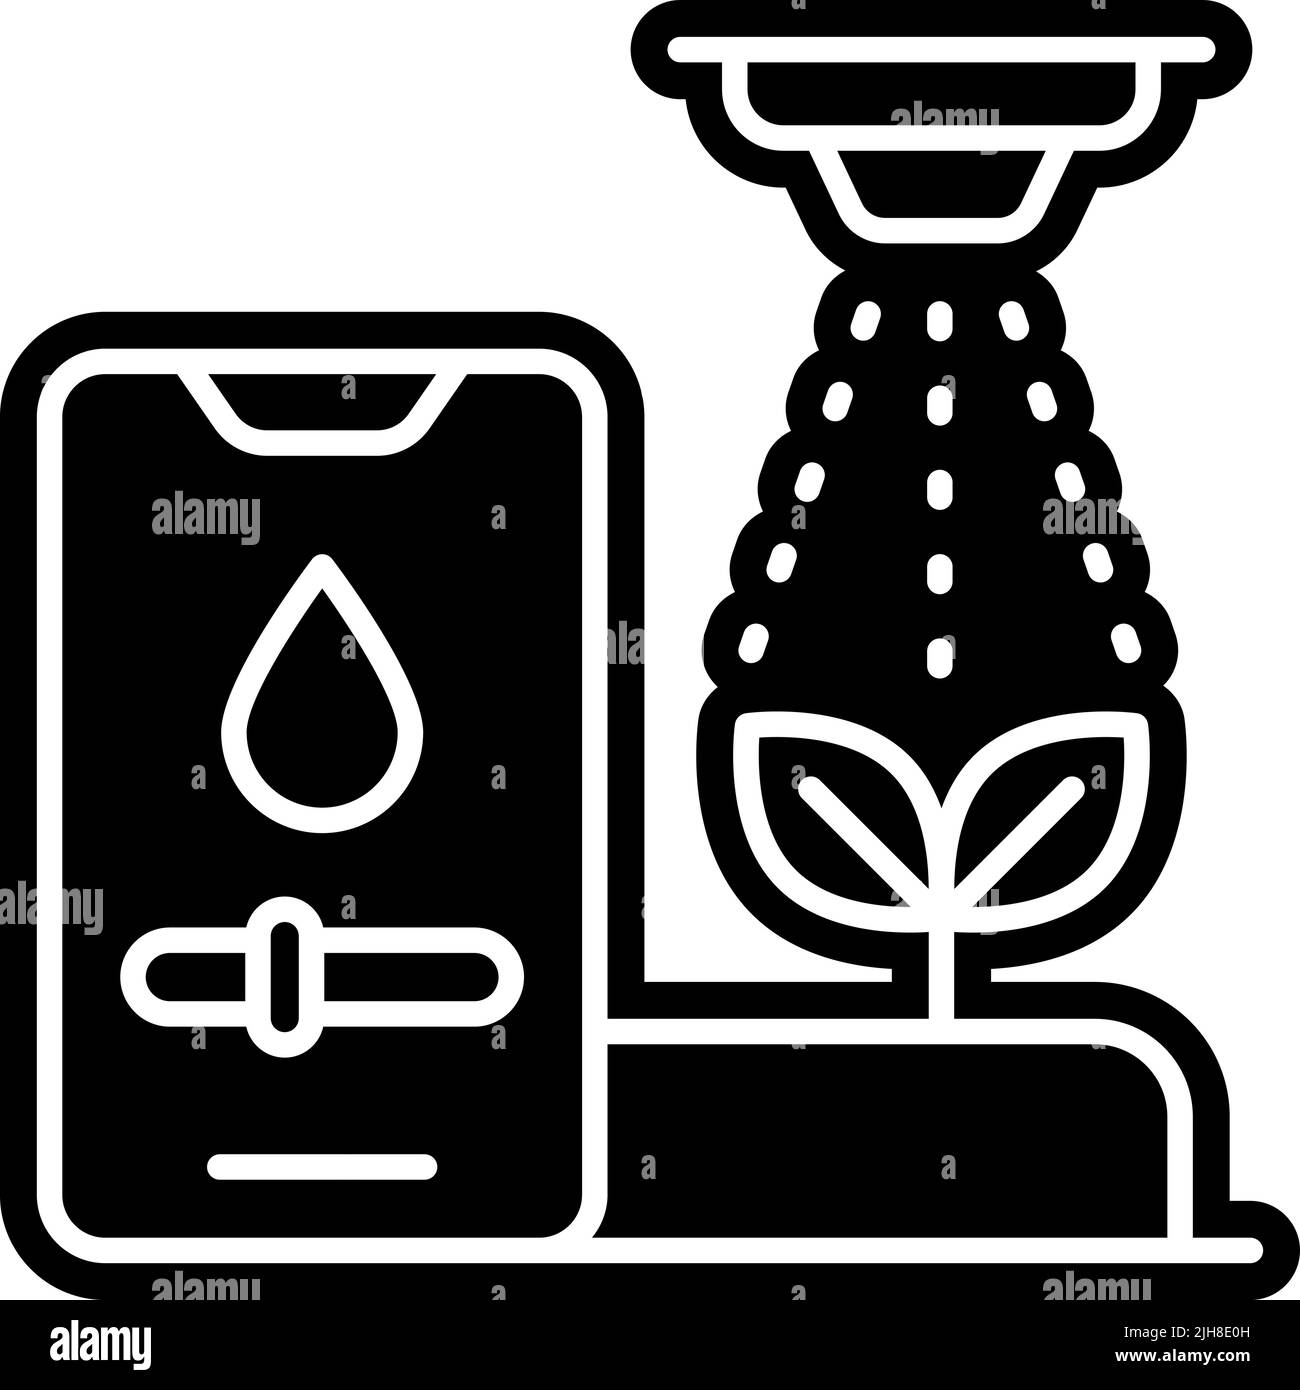 Smart home irrigation system icon Stock Vector